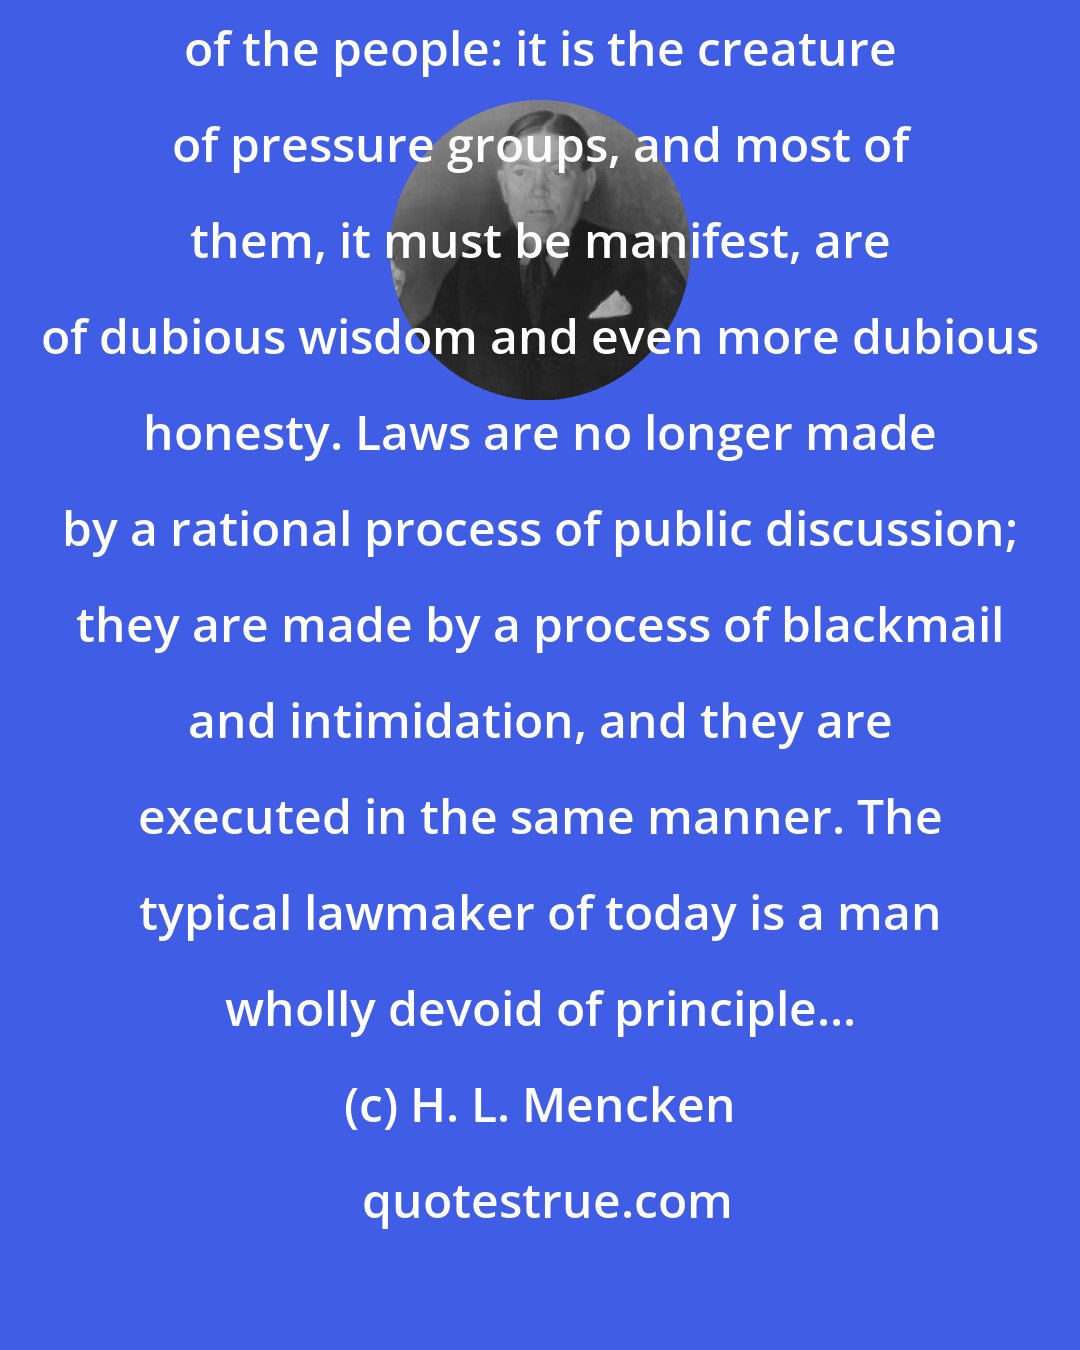 H. L. Mencken: The legislature, like the executive, has ceased to be even the creature of the people: it is the creature of pressure groups, and most of them, it must be manifest, are of dubious wisdom and even more dubious honesty. Laws are no longer made by a rational process of public discussion; they are made by a process of blackmail and intimidation, and they are executed in the same manner. The typical lawmaker of today is a man wholly devoid of principle...